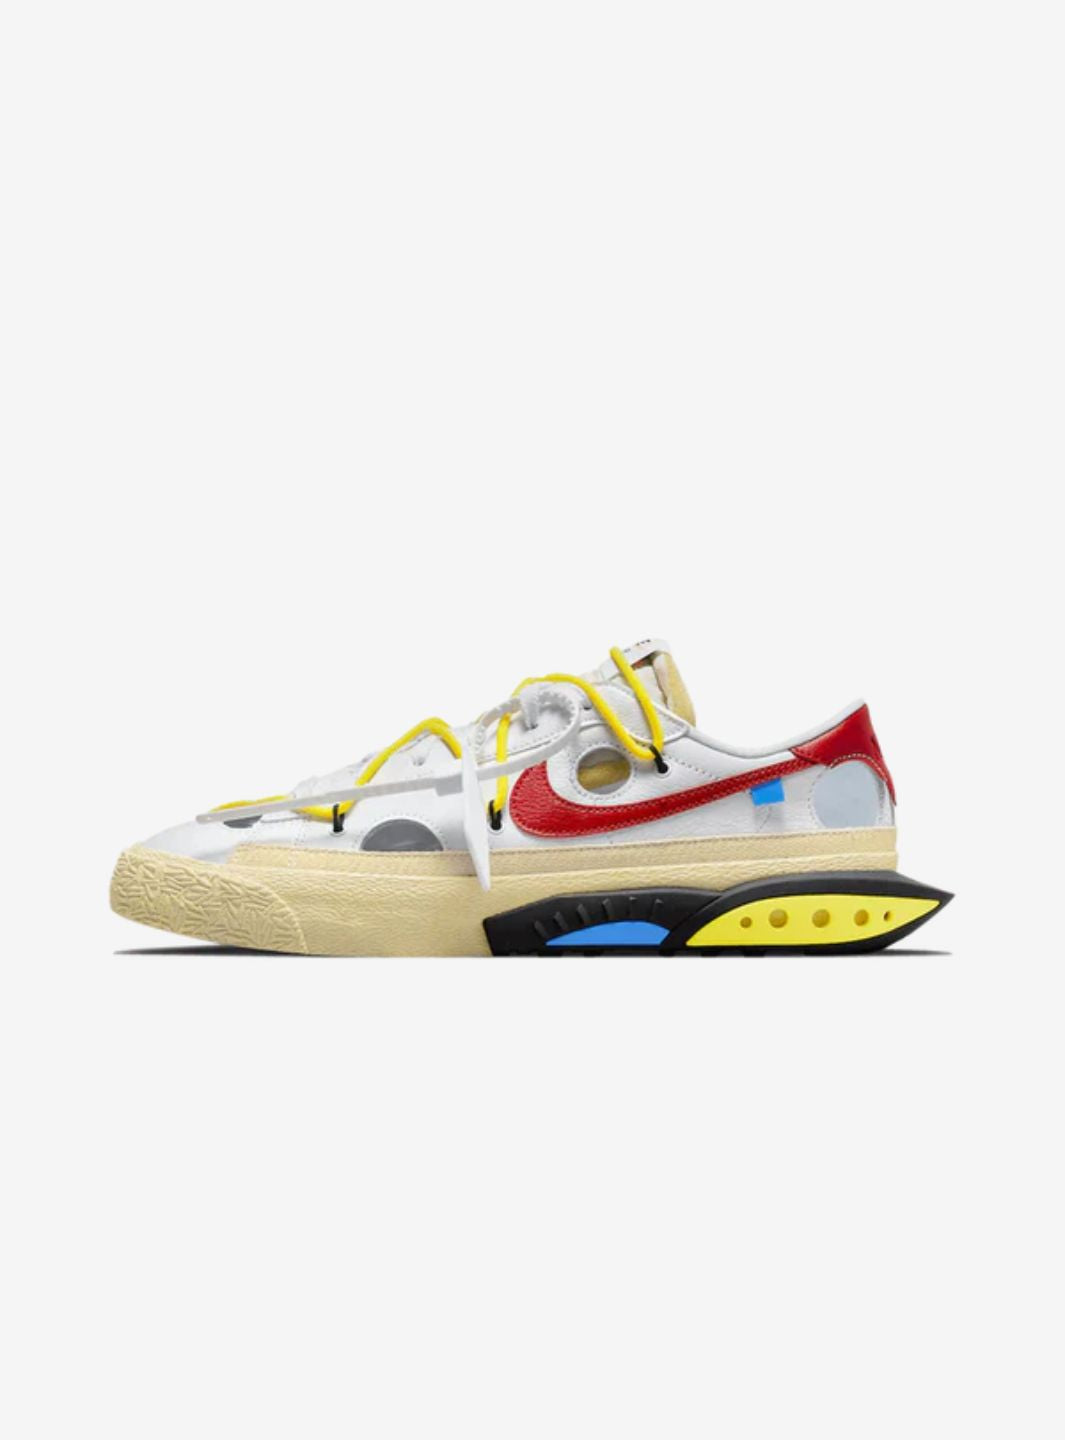 Nike Blazer Low Off-White University Red - DH7863-100 | ResellZone